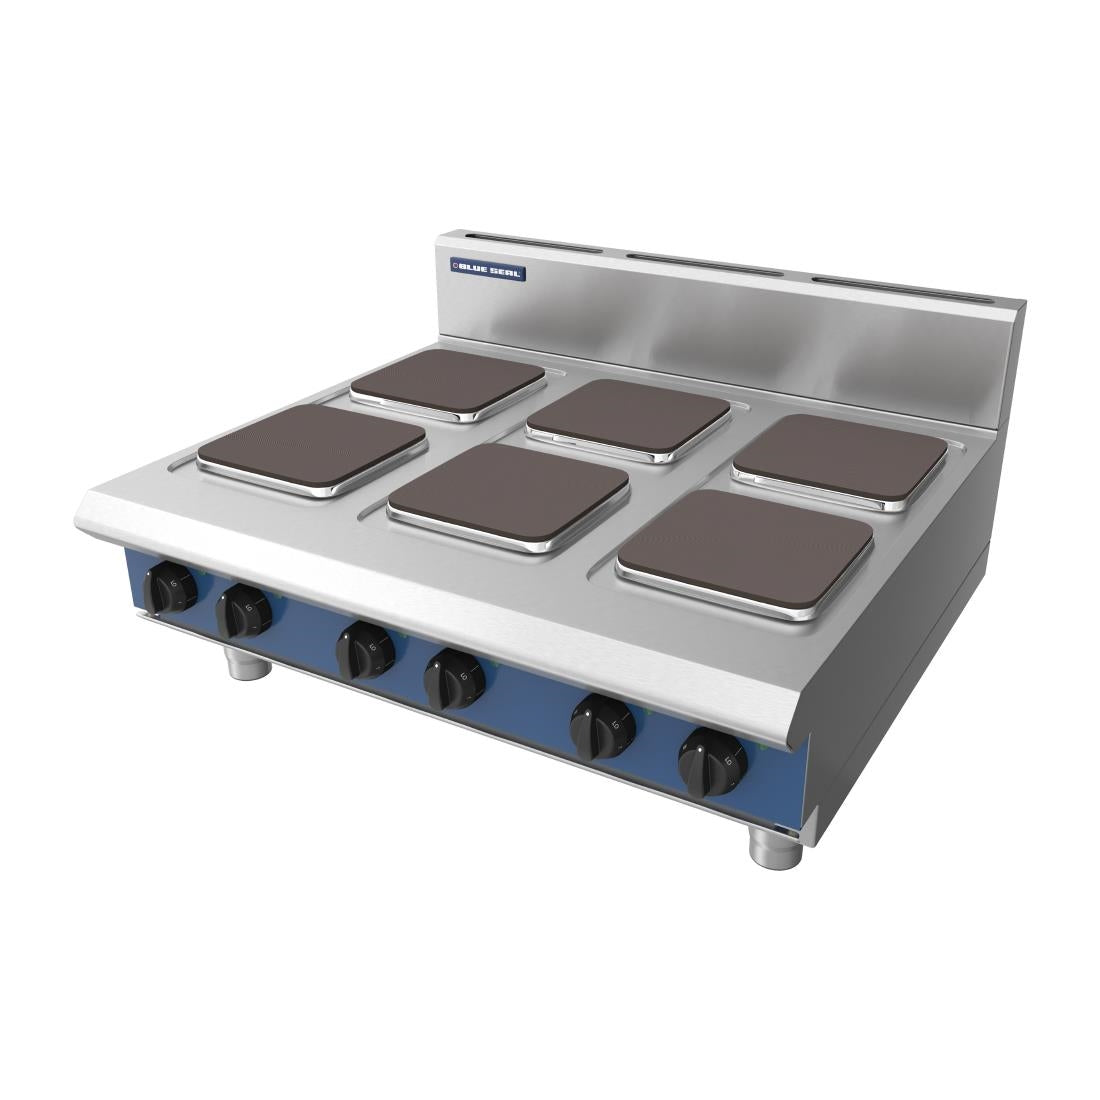 Blue Seal Evolution Series E516S-B - 900mm Electric Cooktop Sealed Hobs - Bench Model JD Catering Equipment Solutions Ltd